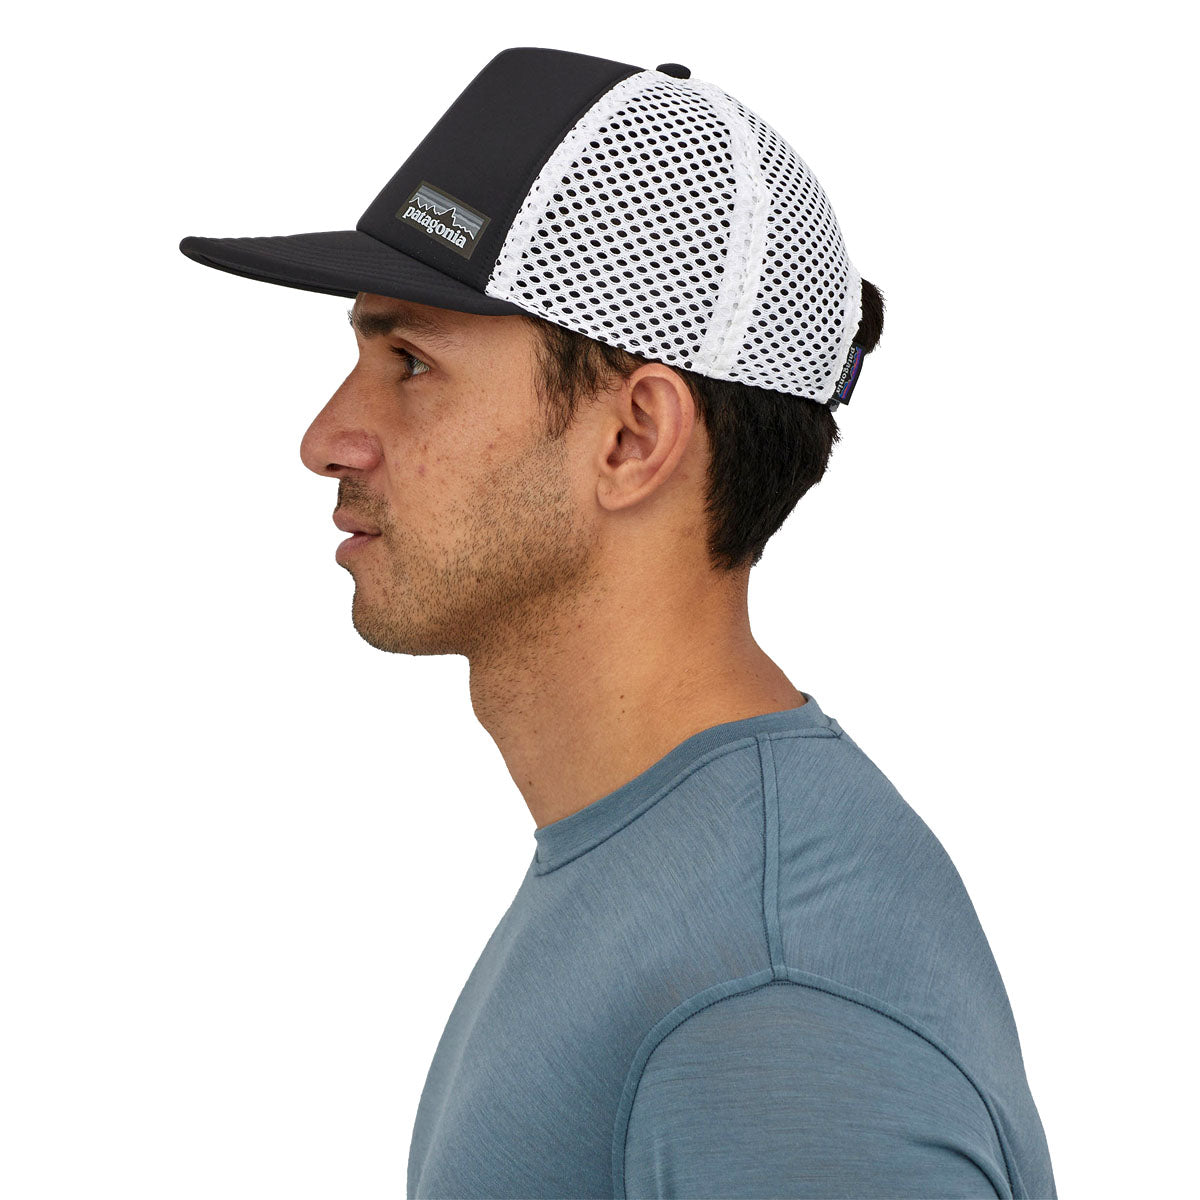 Casquette réglable Patagonia Duckbill Trucker Hat Lost and Found